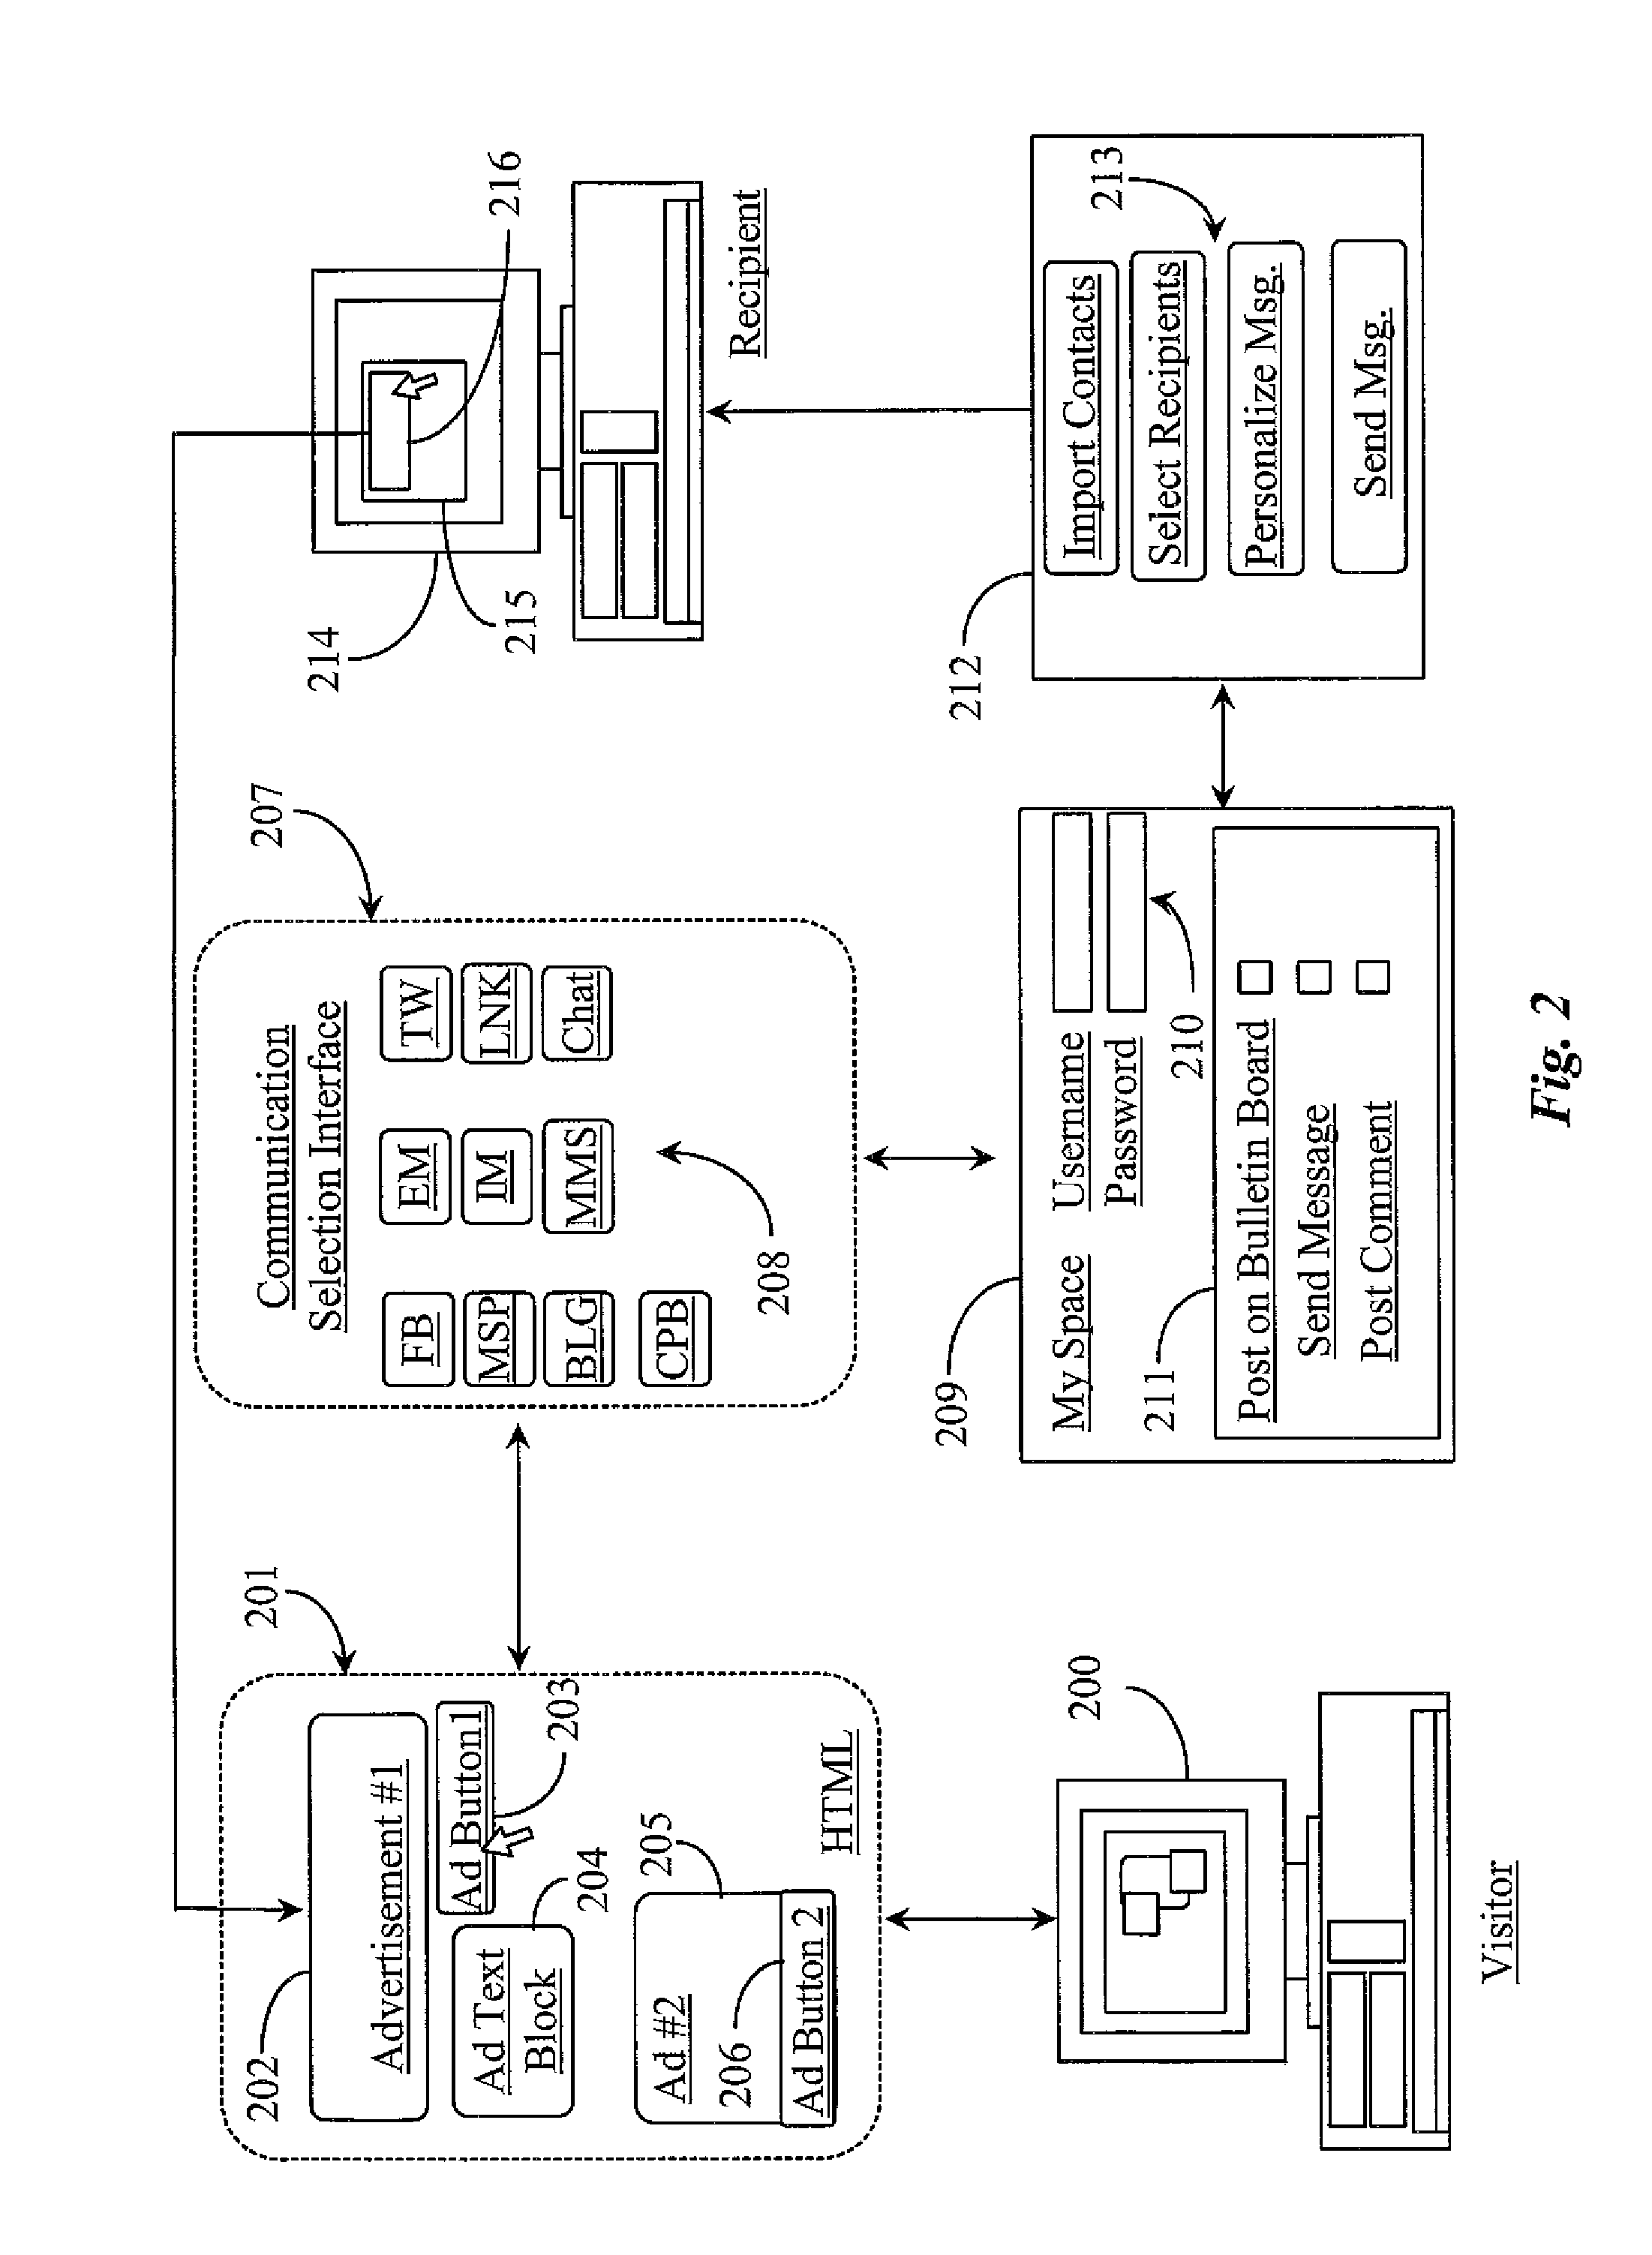 System and Methods for Marketing and Advertising Referral over a Communications Network